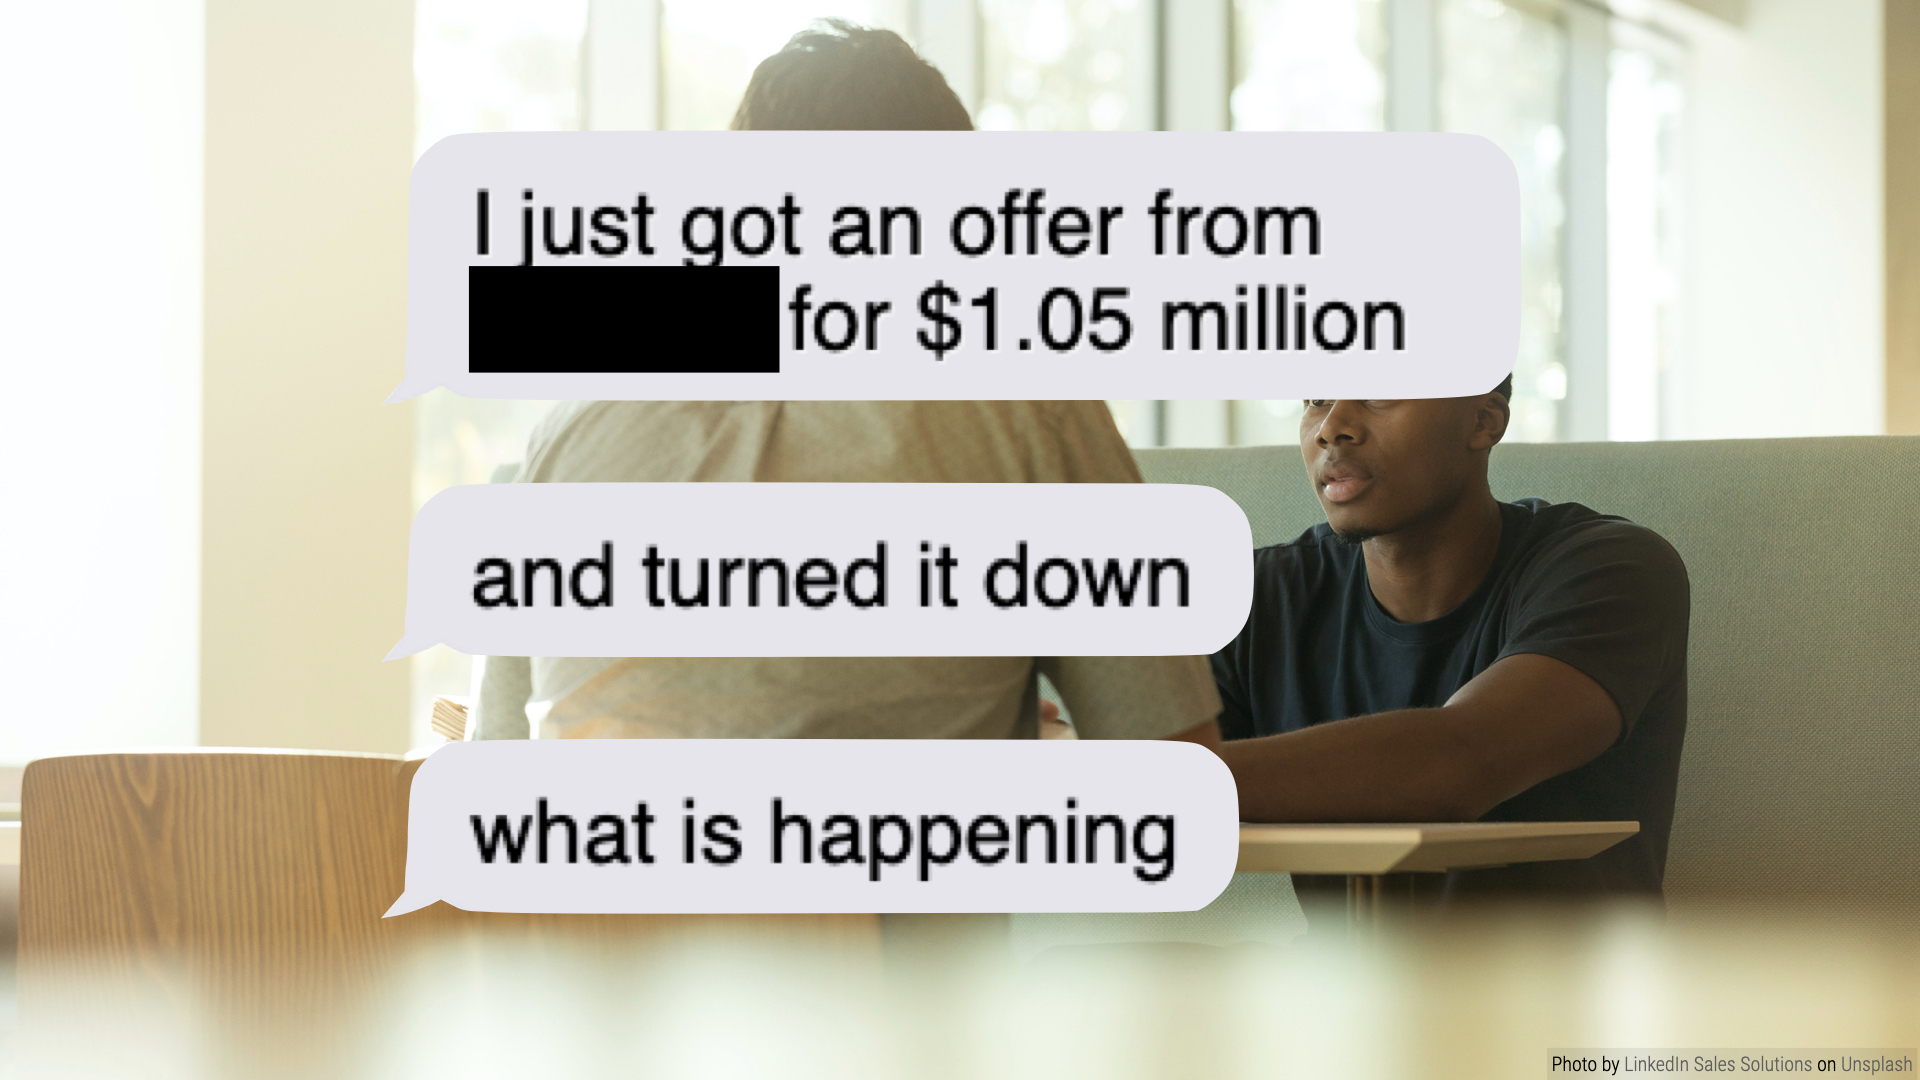 Those same two people talking, now with a text message conversation overlaid. It reads: 'I just got an offer from [Redacted] for $1.05 million. And turned it down. What is happening?'